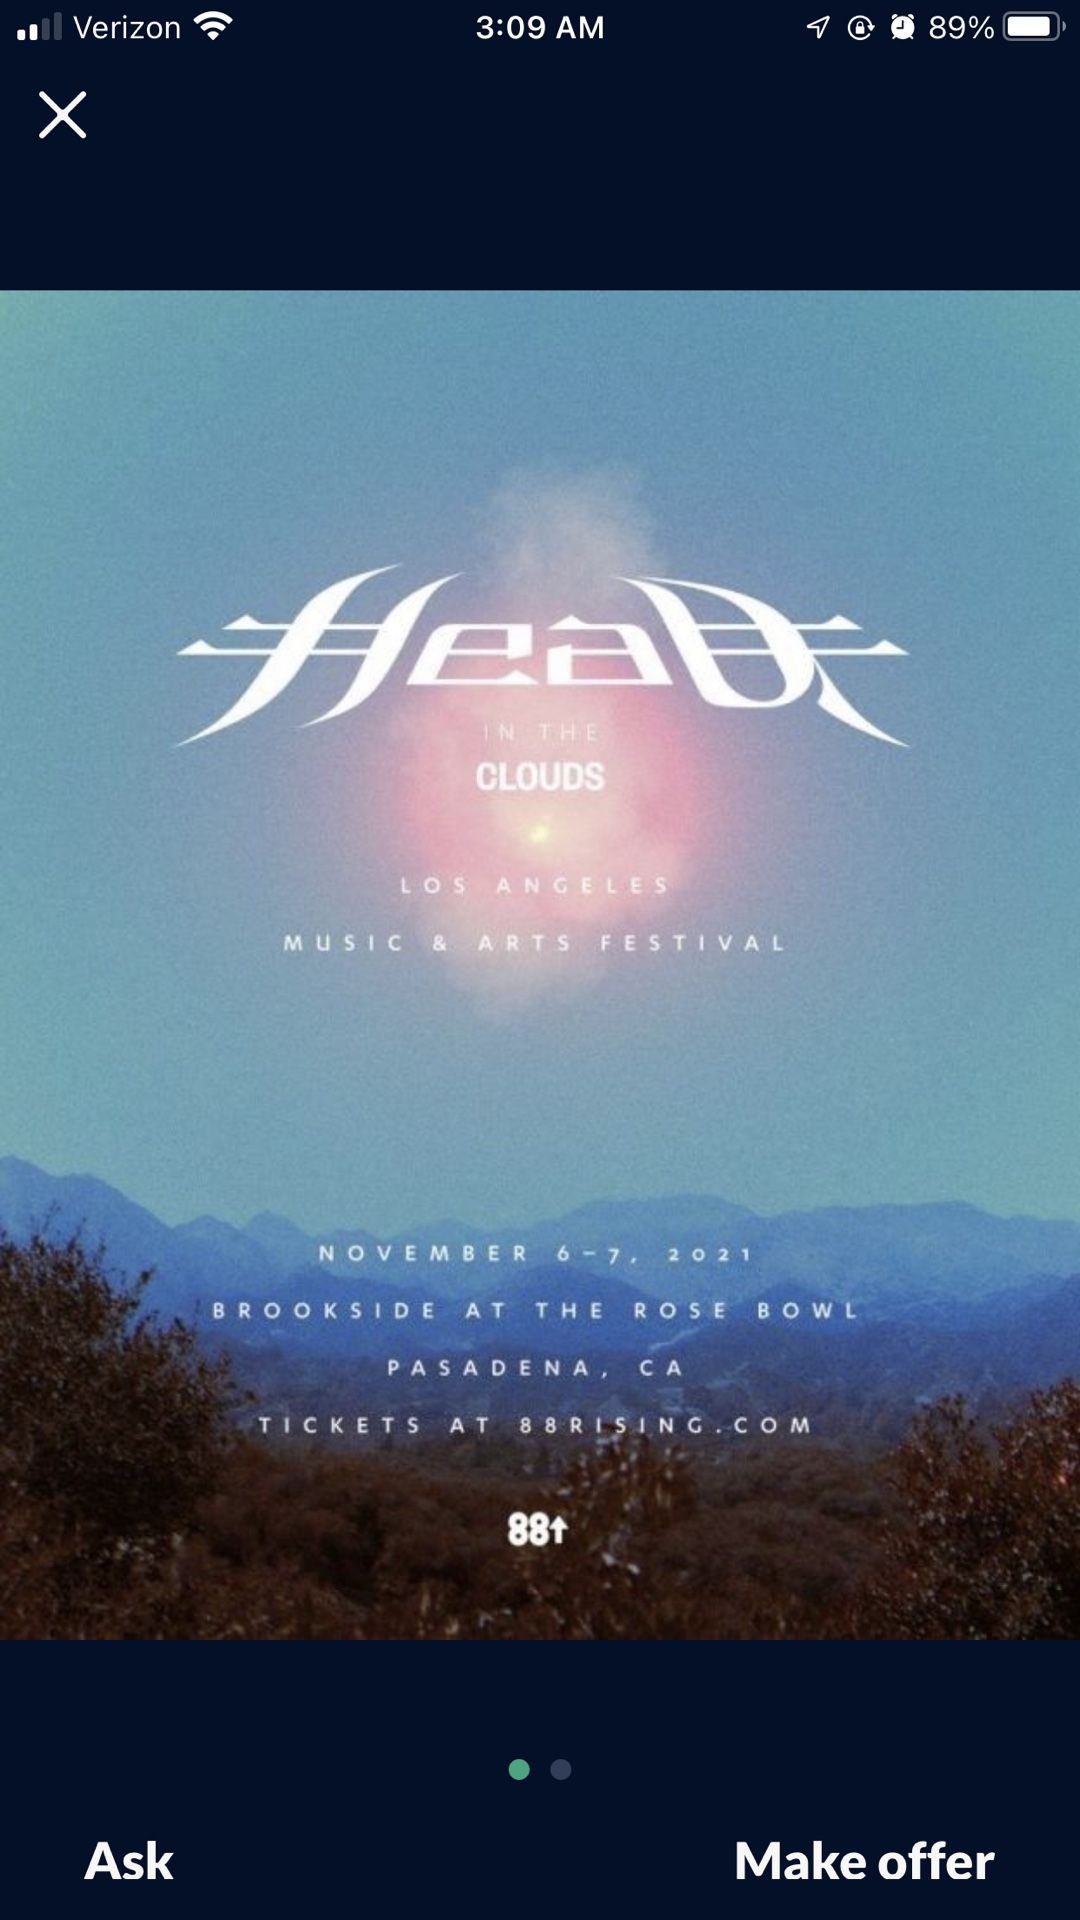 HEAD IN THE CLOUDS ☁️ 😶‍🌫️ MUSIC 🎶 & ARTS 🎭 FESTIVAL  🎤🍺🍻🍹SATURDAY & SUNDAY NOVEMBER 6-7 (2) WRISTBANDS 🎟🎟 $200 EACH $400 FOR PAIR 